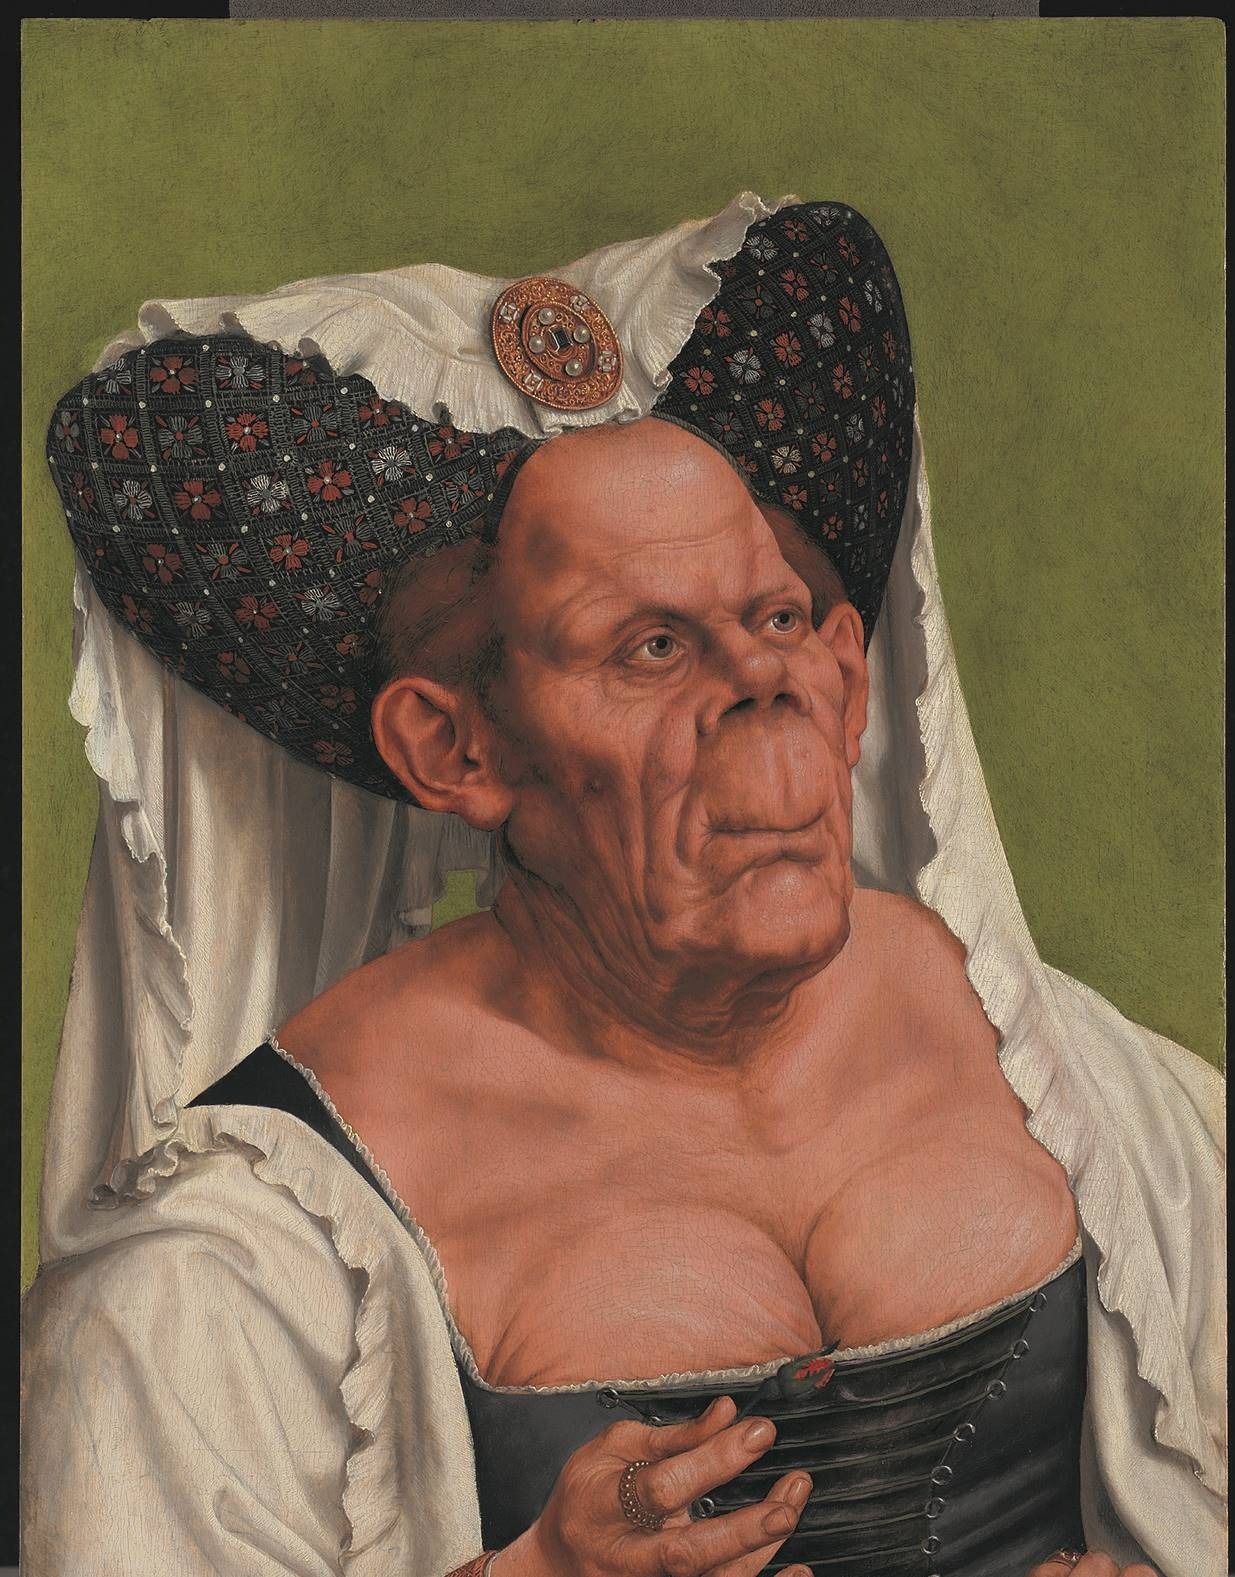 'An Old Woman' - commonly known as 'The Ugly Duchess' - by Quinten Massys. The portrait depicts an old woman with exaggerated features, including a bulging forehead and bosom squeezed into an ill-fitting corset